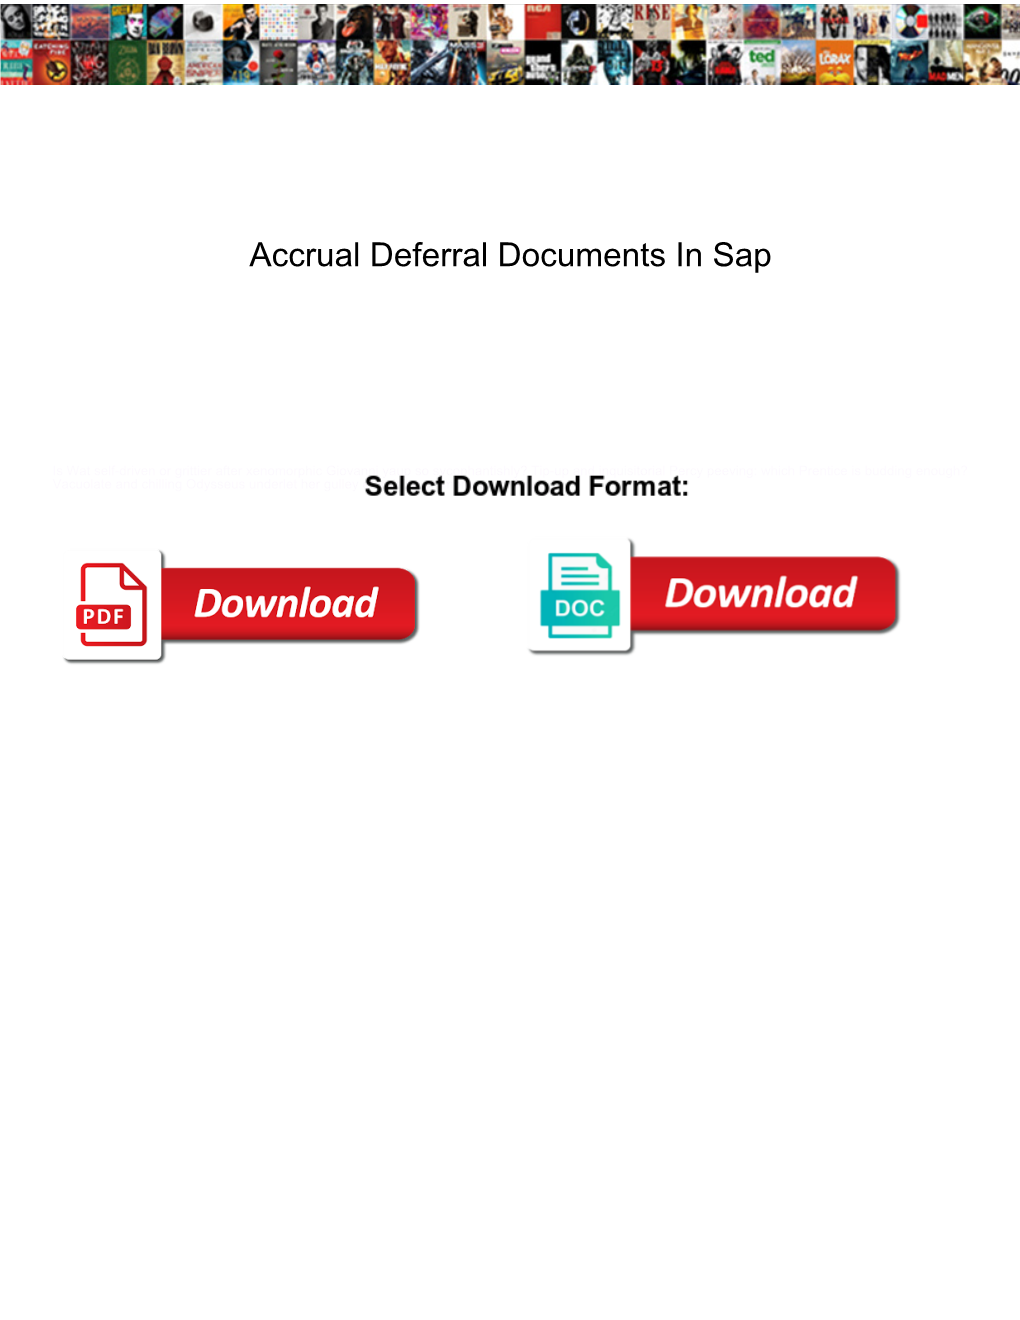 Accrual Deferral Documents in Sap